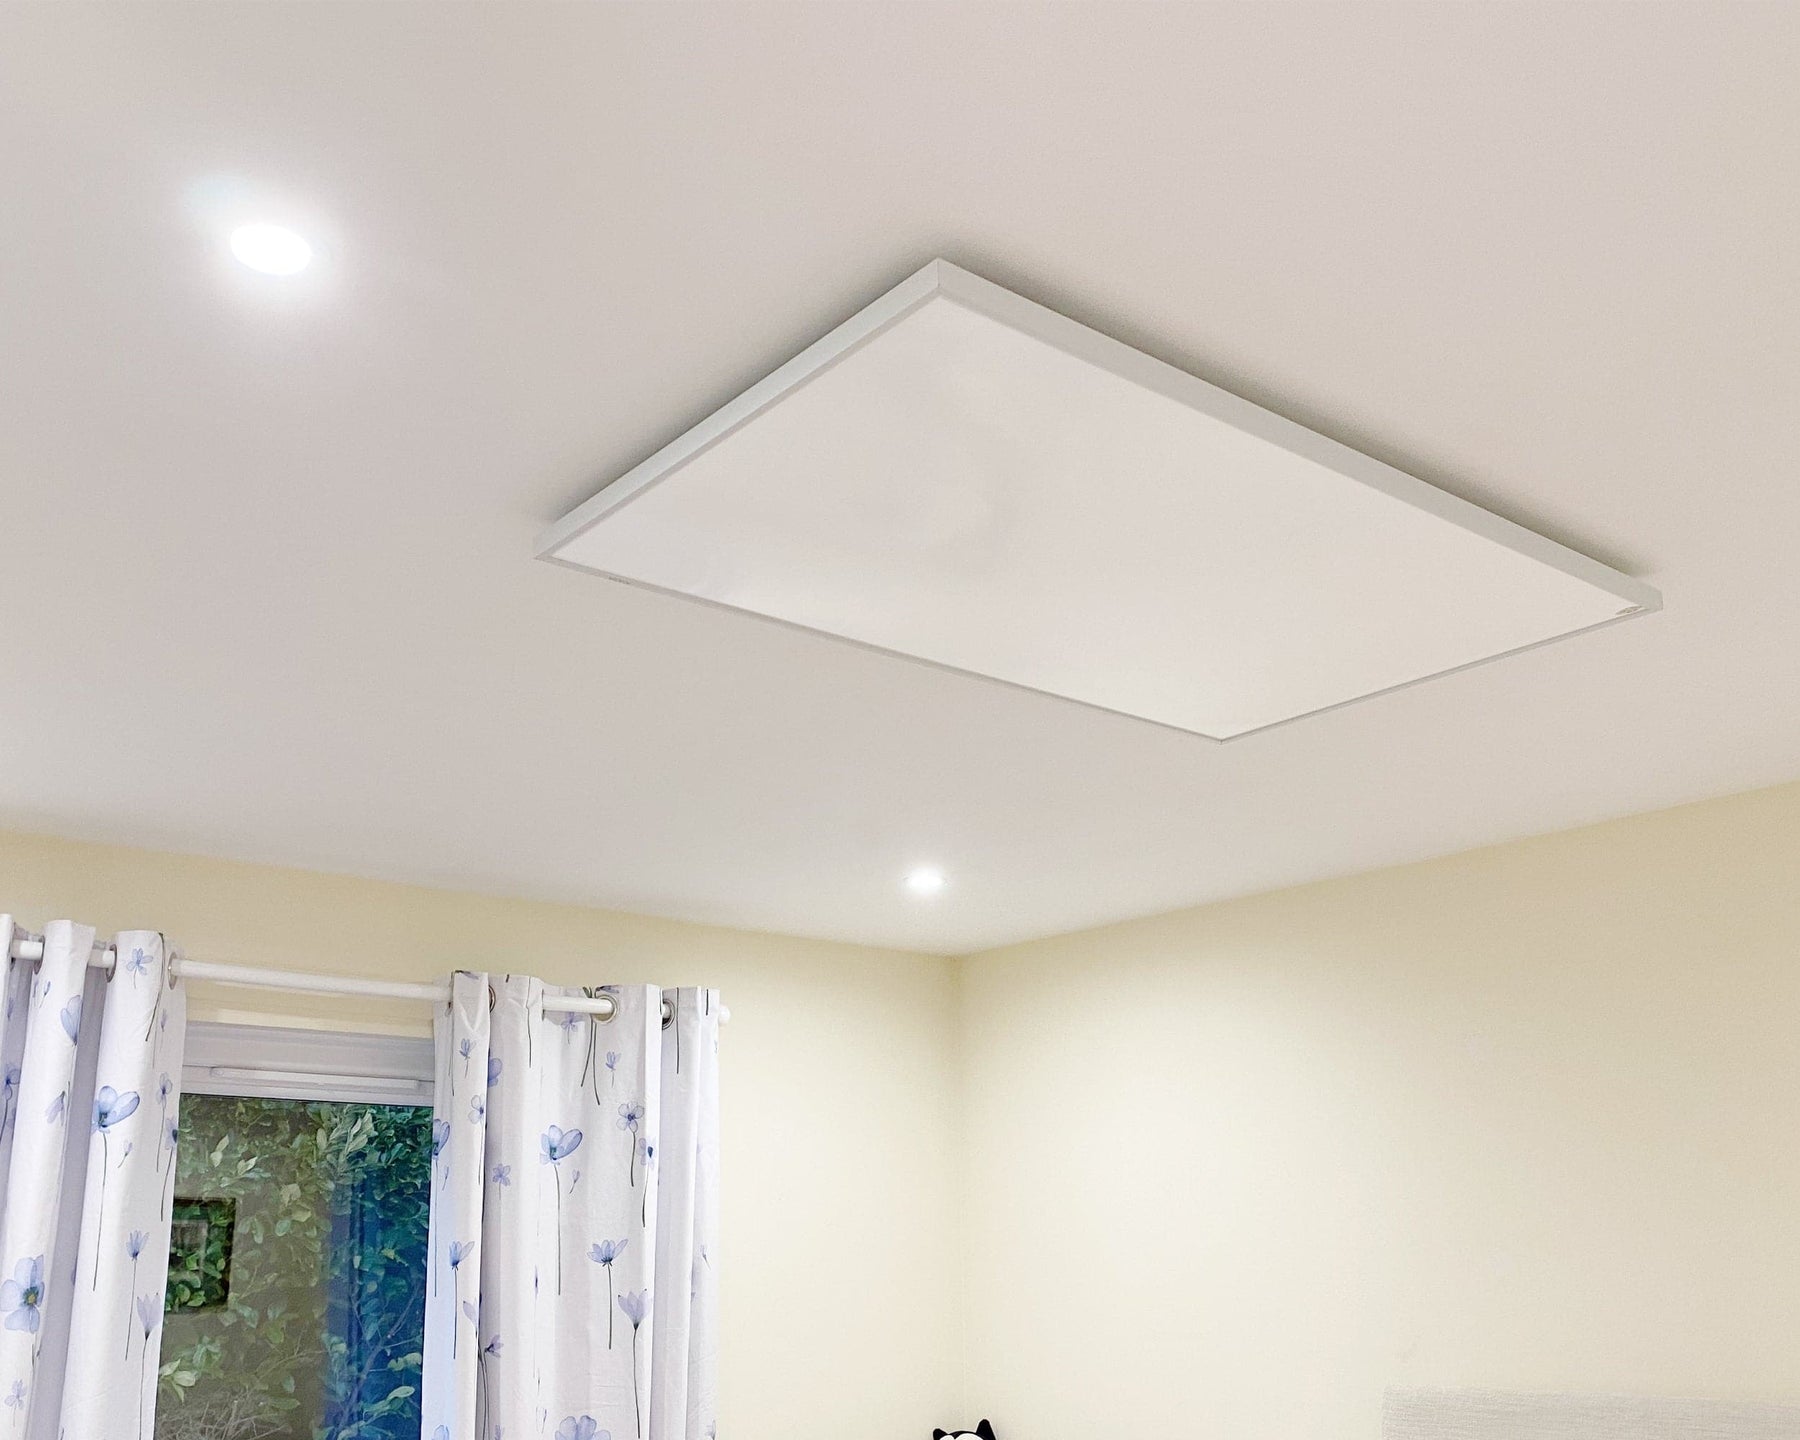 Kiasa 720W Infrared Panel - 100cm x 60cm - Ceiling Mounted in the hall room.